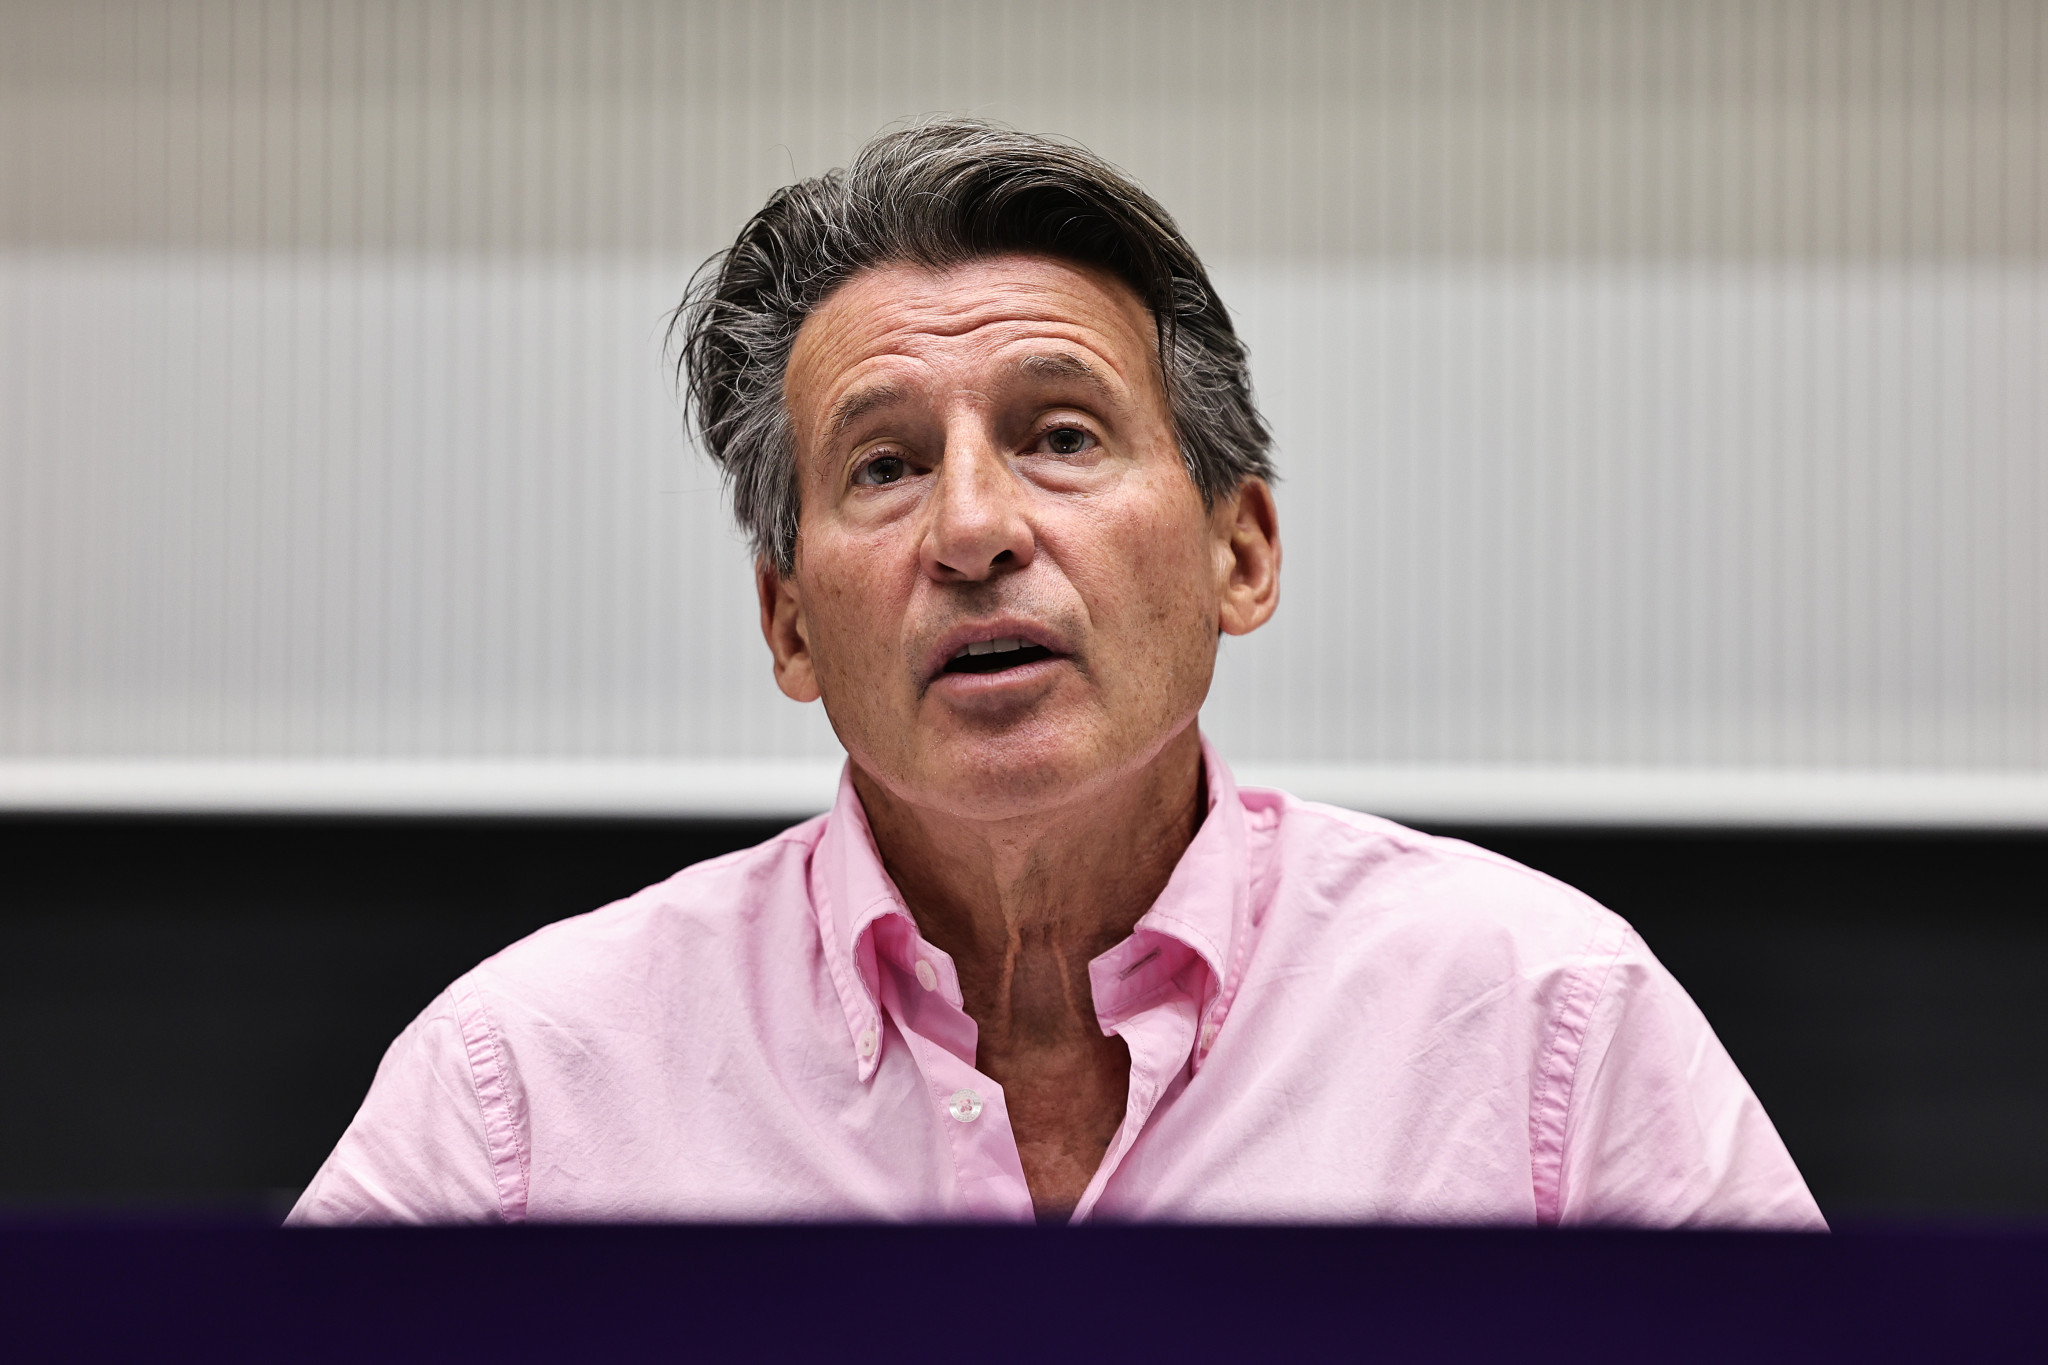 Sebastian Coe became World Athletics President in 2015 ©Getty Images